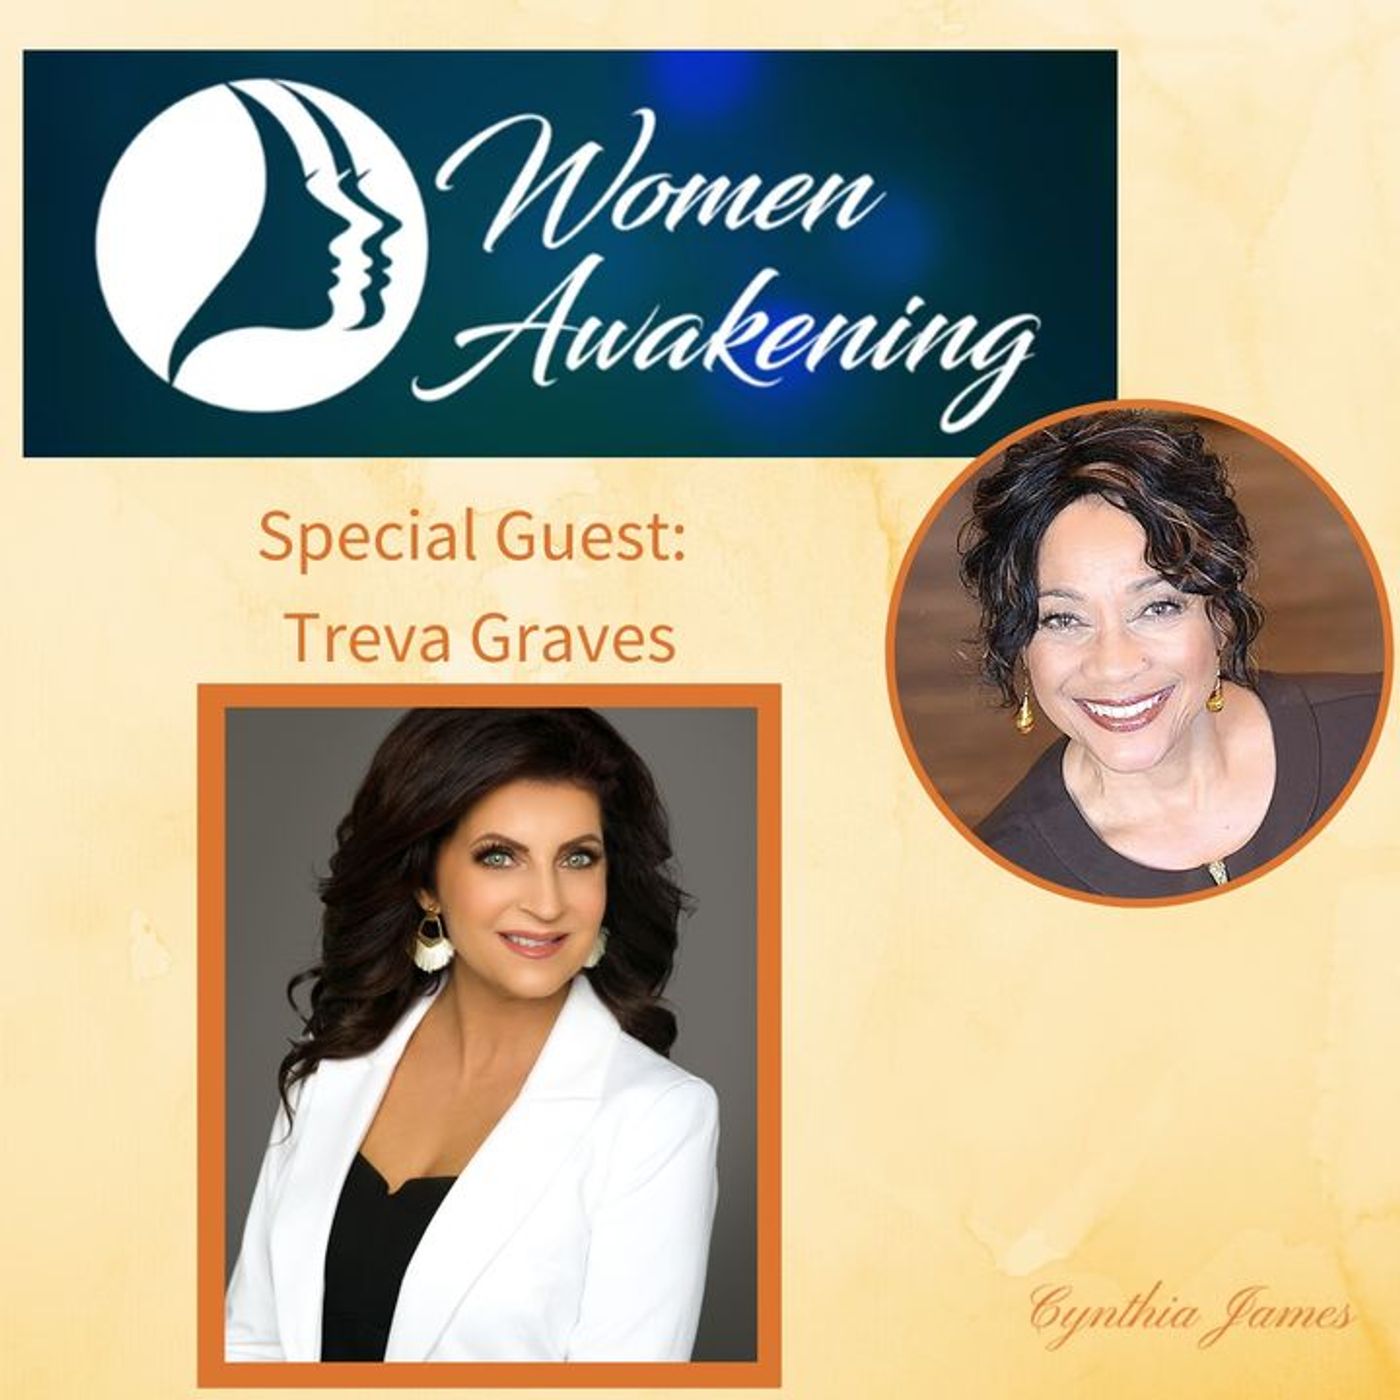 Cynthia with Treva Graves, M.A. CCC-SLP is the founder & CEO of Bloom Personal Branding and author of Self-Doubt Detox –5 Steps